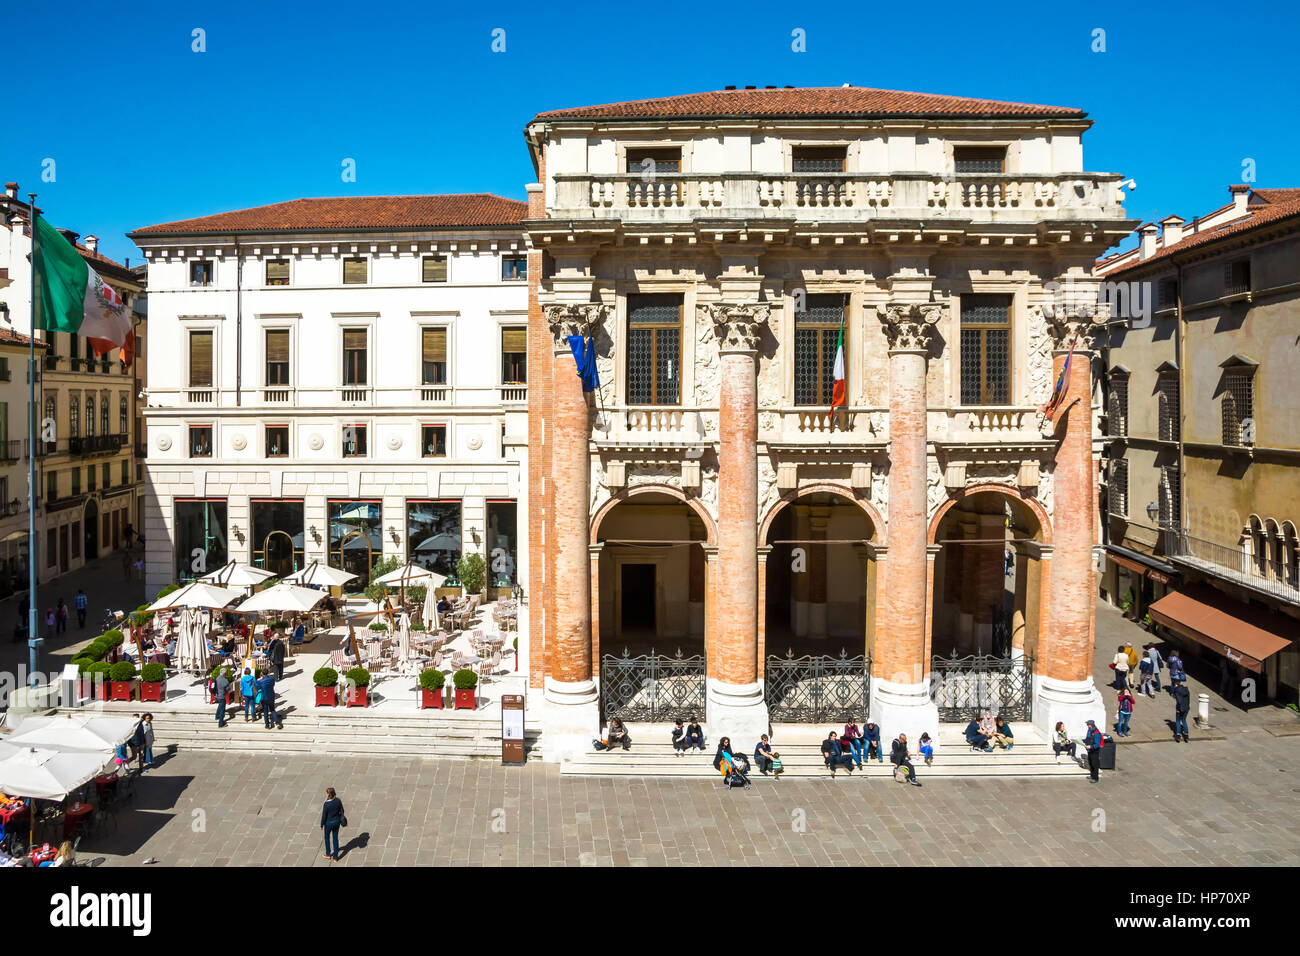 Vicenza,Italy-April 3,2015:people stroll in front of the Capitaniato  lodge in the Vicenza town square .during a sunny day. Stock Photo